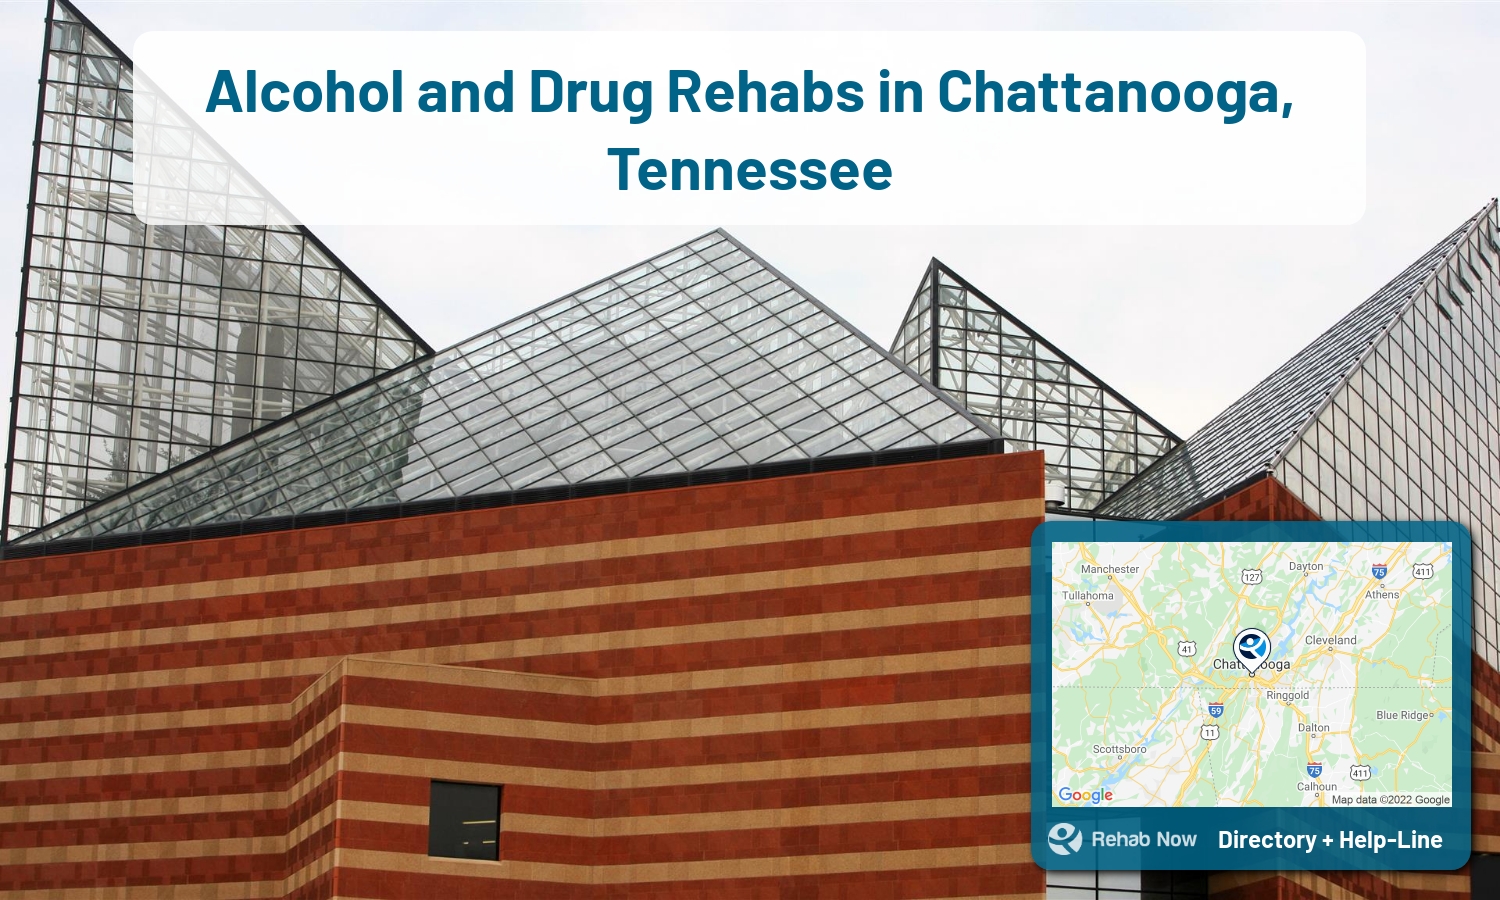 Chattanooga, TN Treatment Centers. Find drug rehab in Chattanooga, Tennessee, or detox and treatment programs. Get the right help now!